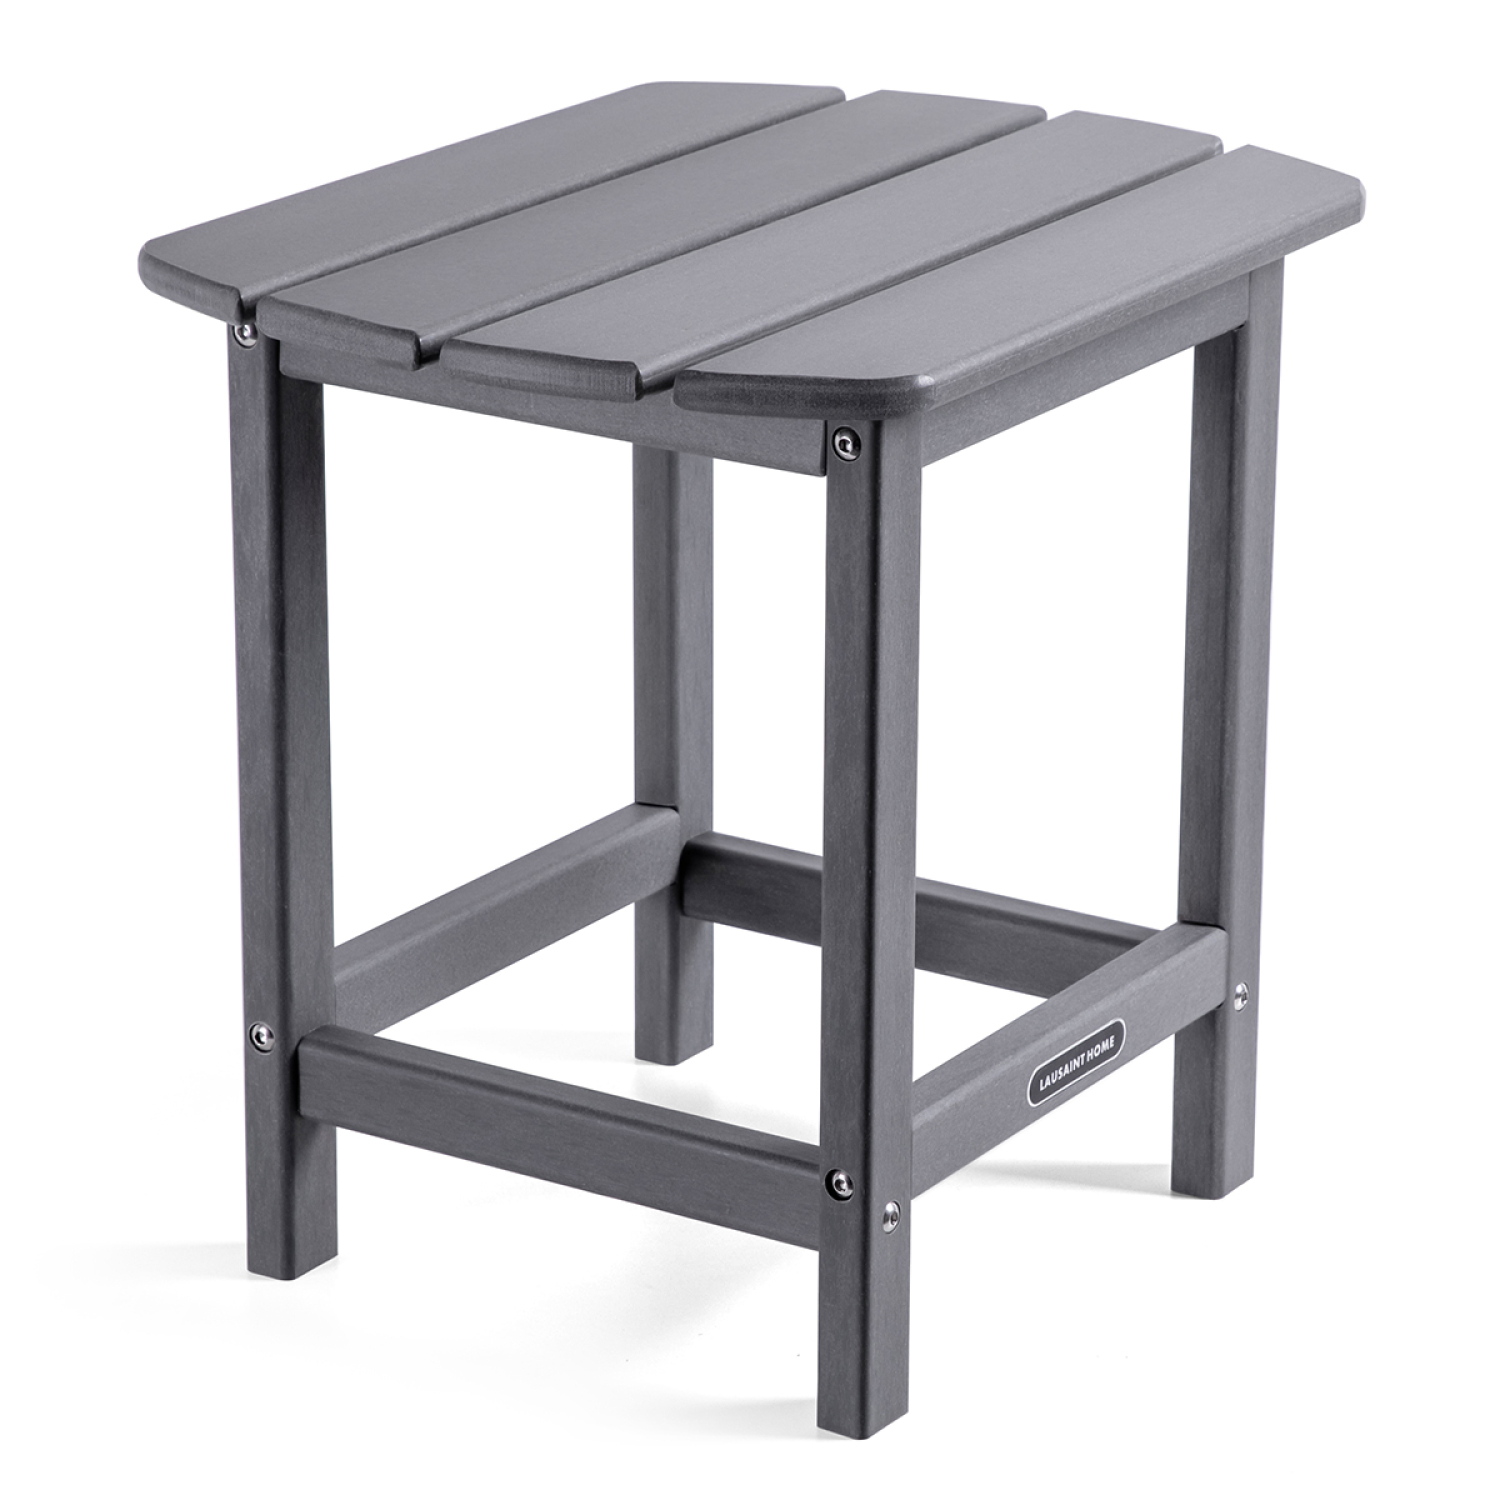 Clearance! Rectangle Adirondack Outdoor Side Table,18 Inches Chairside Tea Tables with Storage Shelf,Weather Resistant Outdoor End Table for Patio,Pool,Yard - image 1 of 7